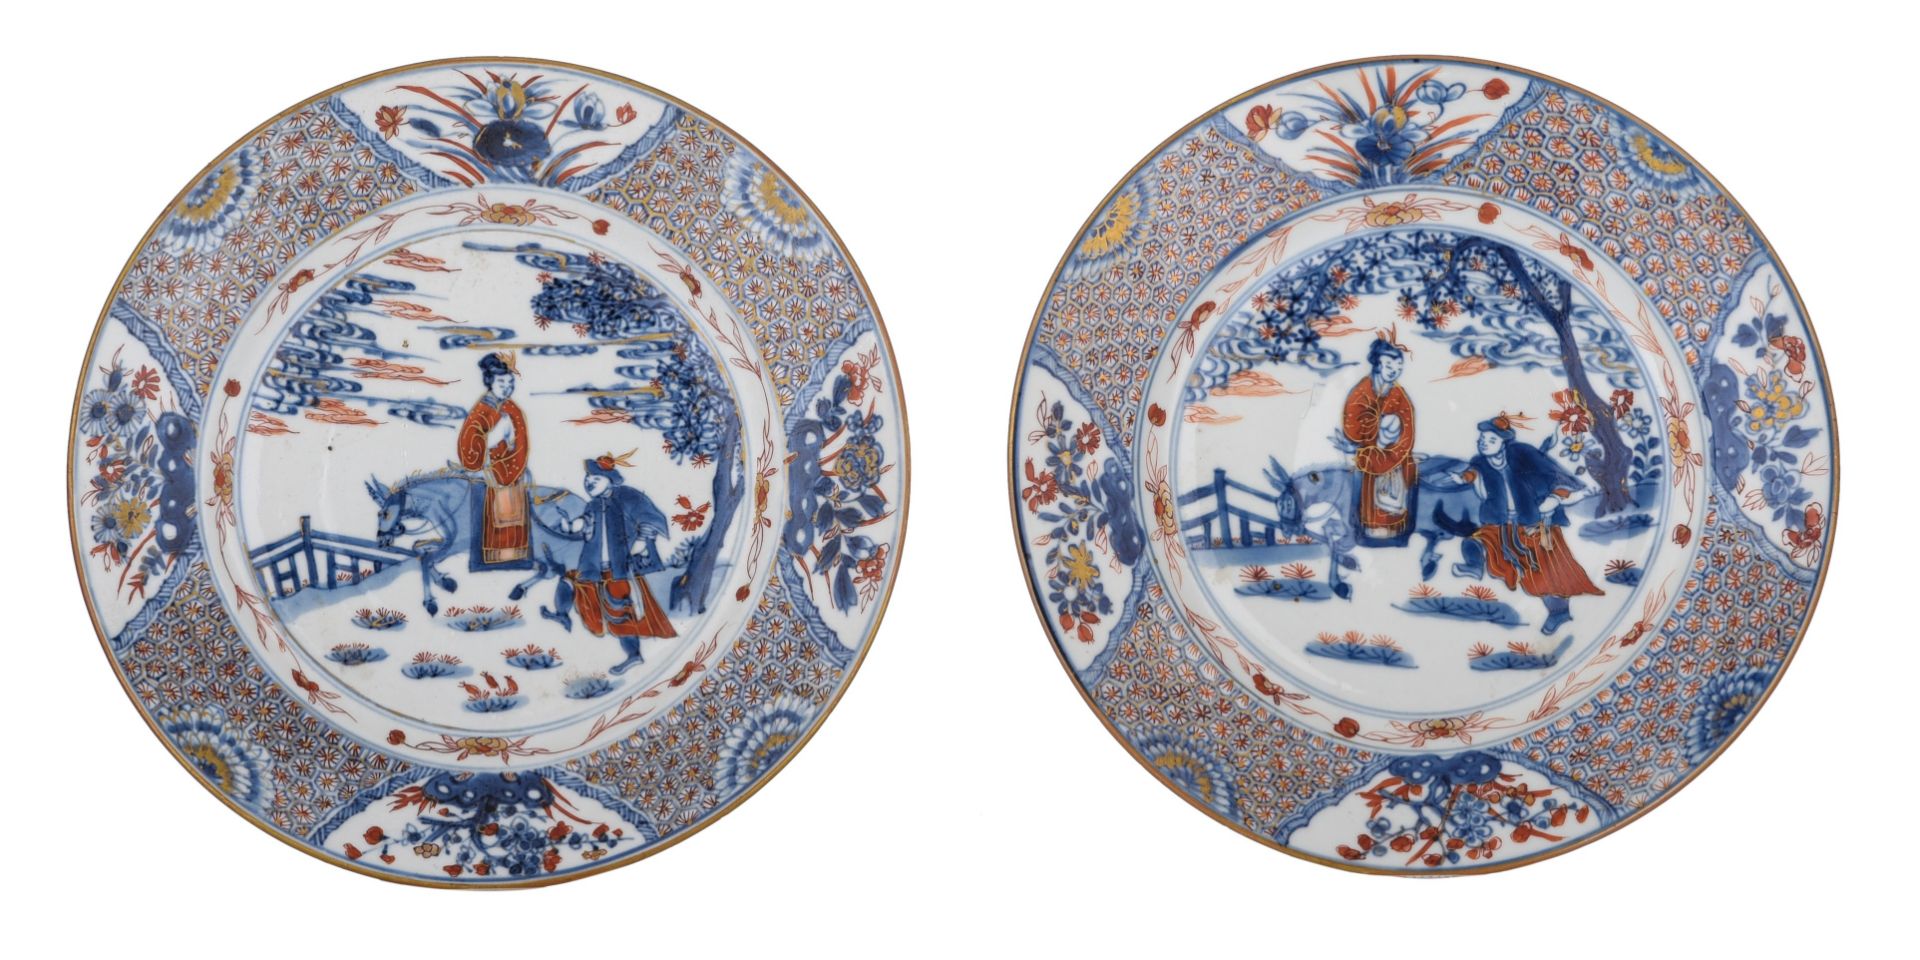 (BIDDING ONLY ON CARLOBONTE.BE) A collection of fine Chinese Imari figural export porcelain plates, - Image 5 of 10